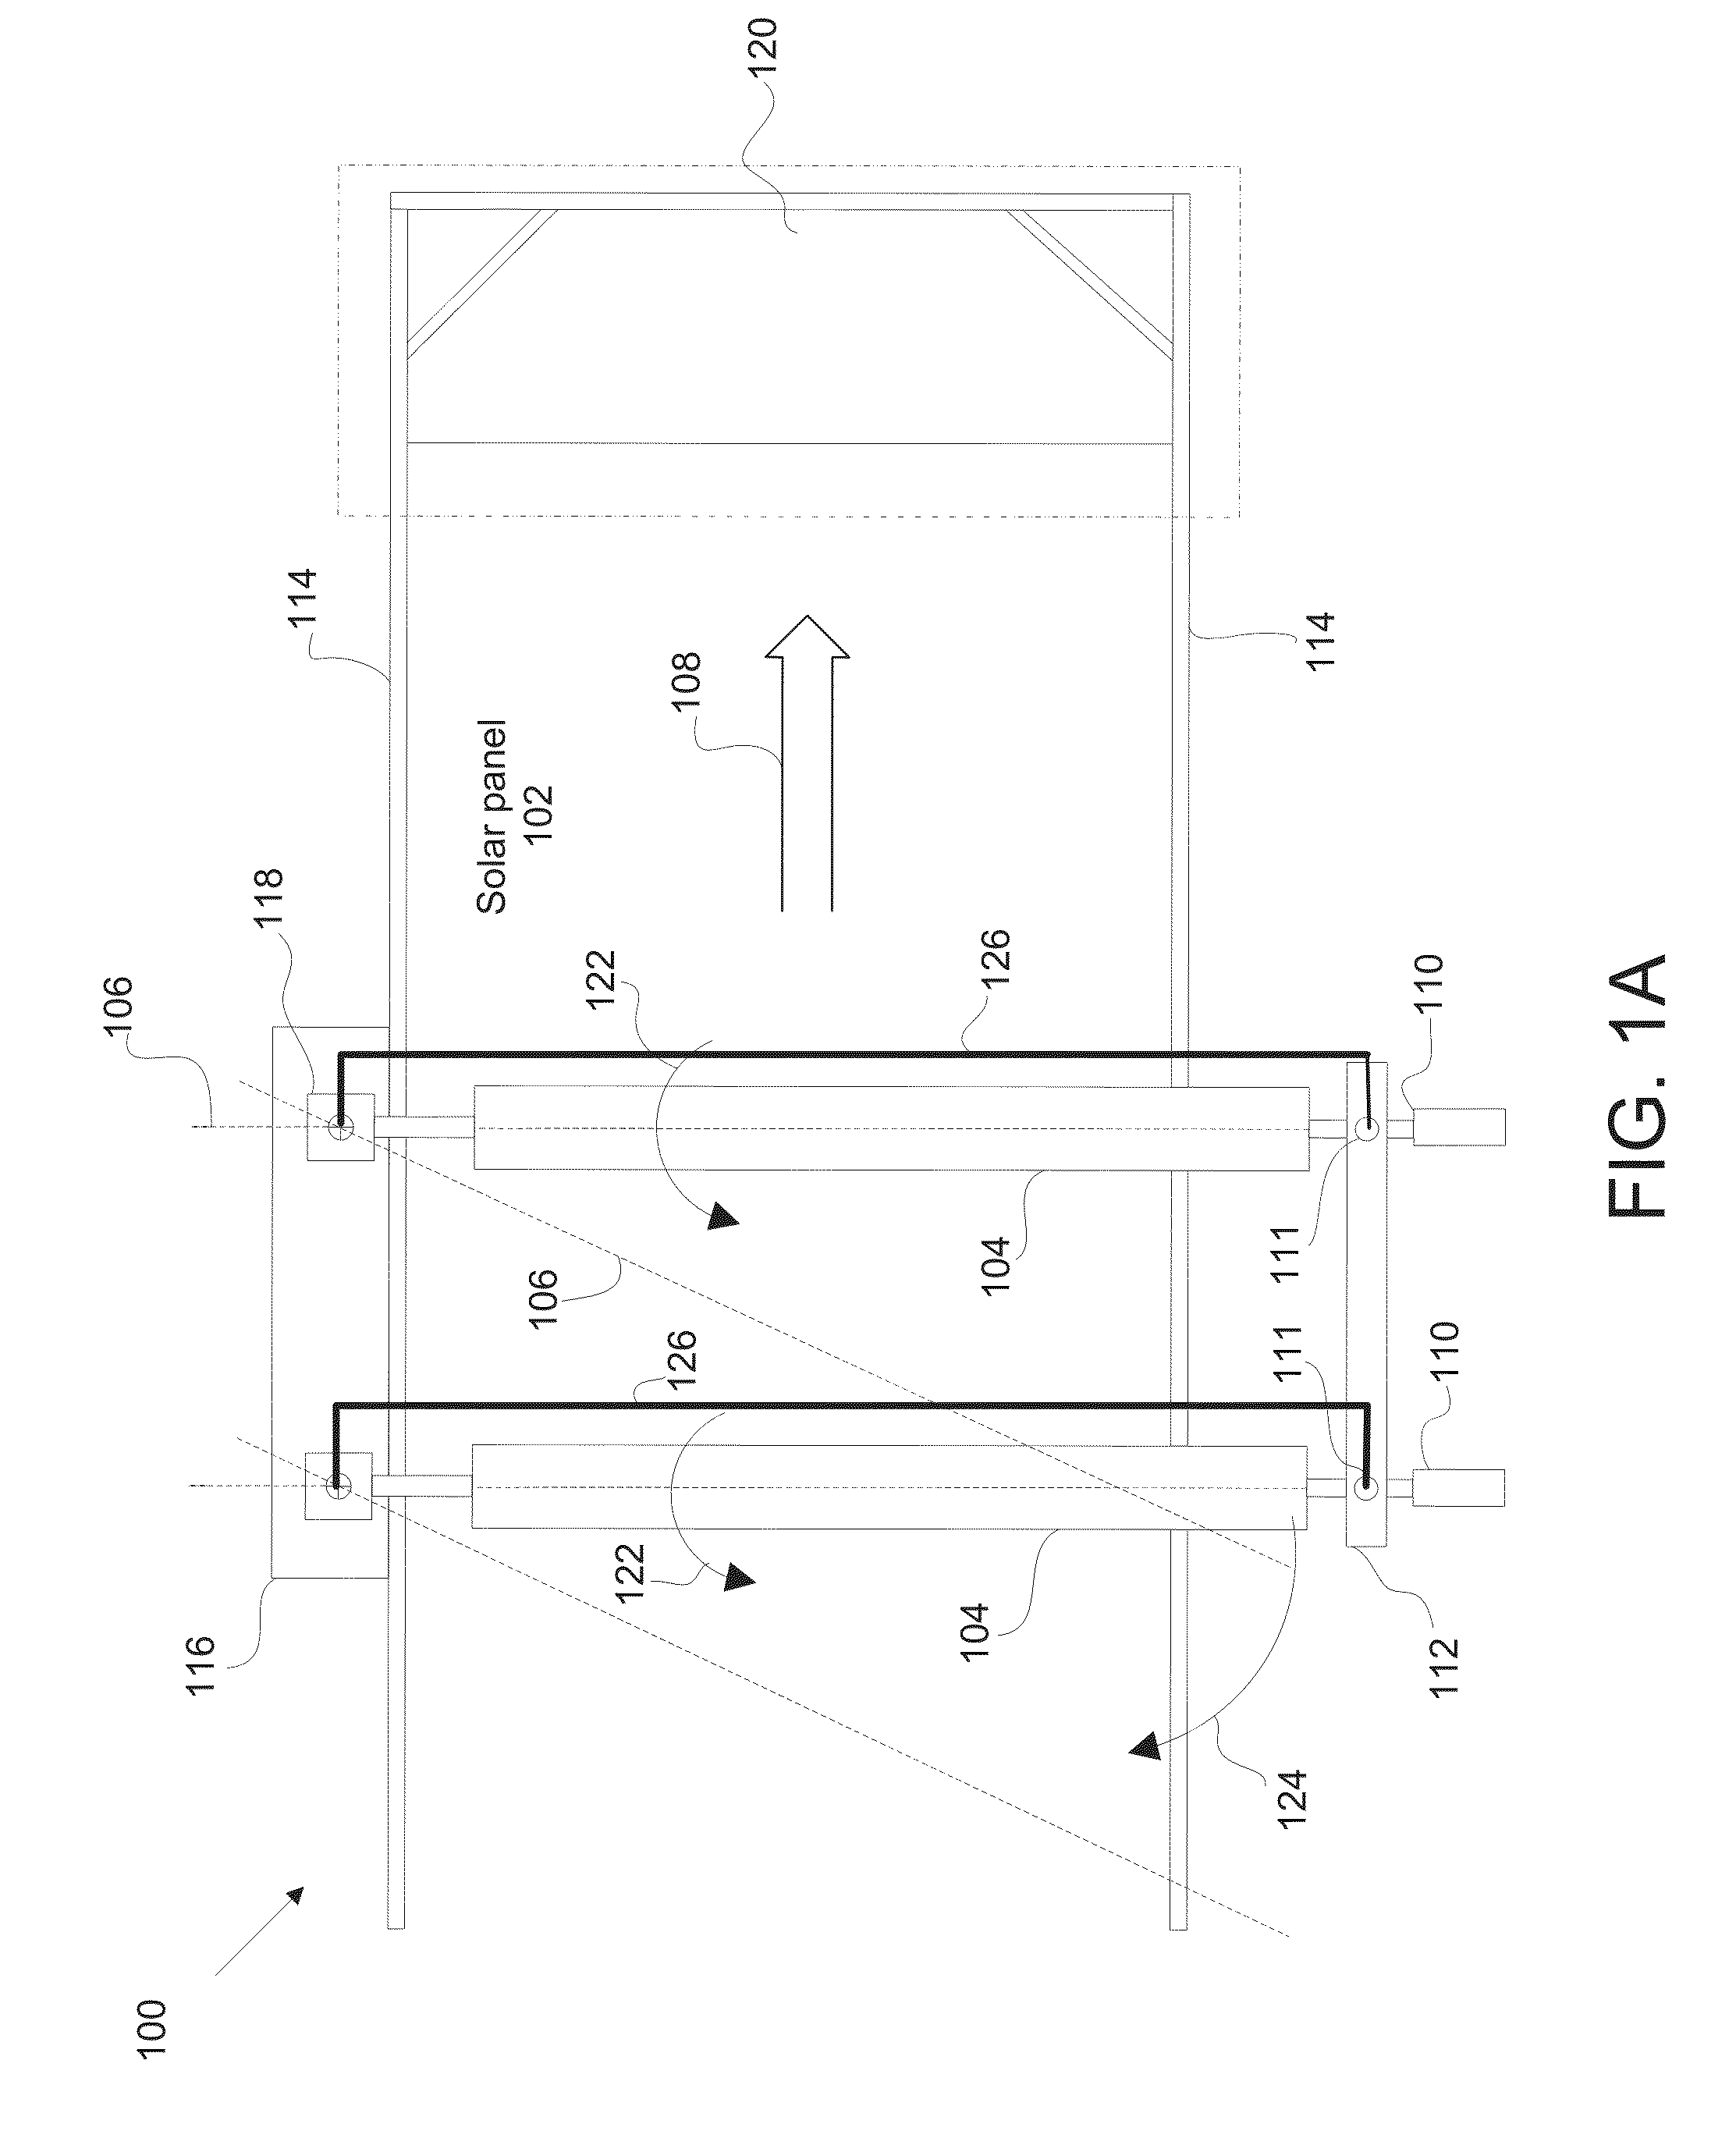 Apparatuses, Systems and Methods for Cleaning Photovoltaic Devices